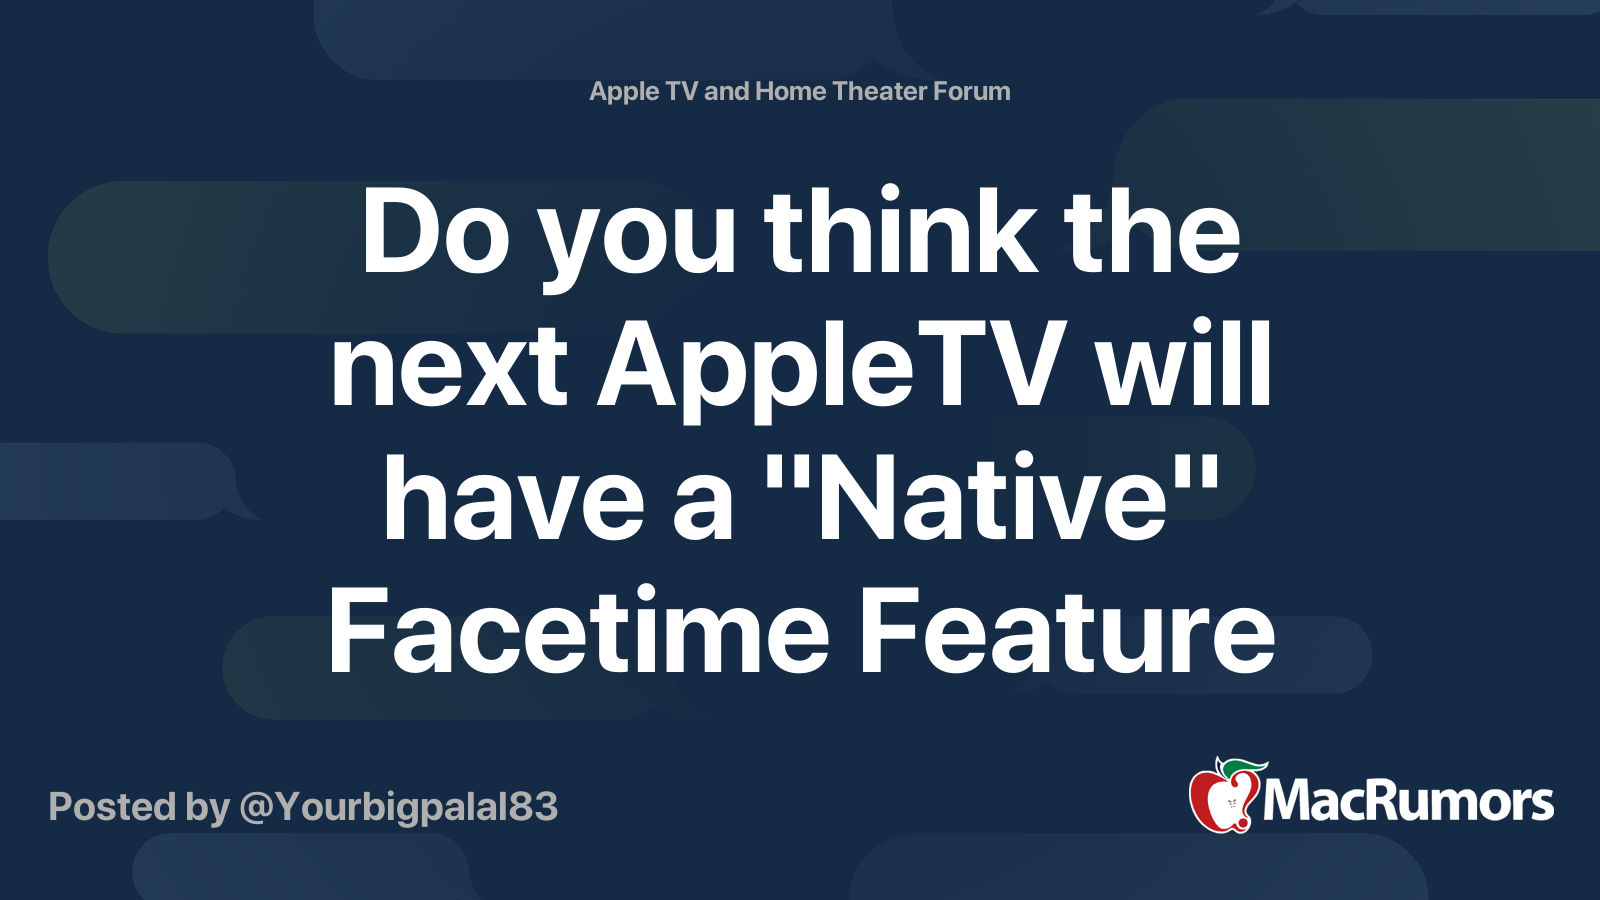 Do you think the next AppleTV will have a Native Facetime Feature (camera  add on)